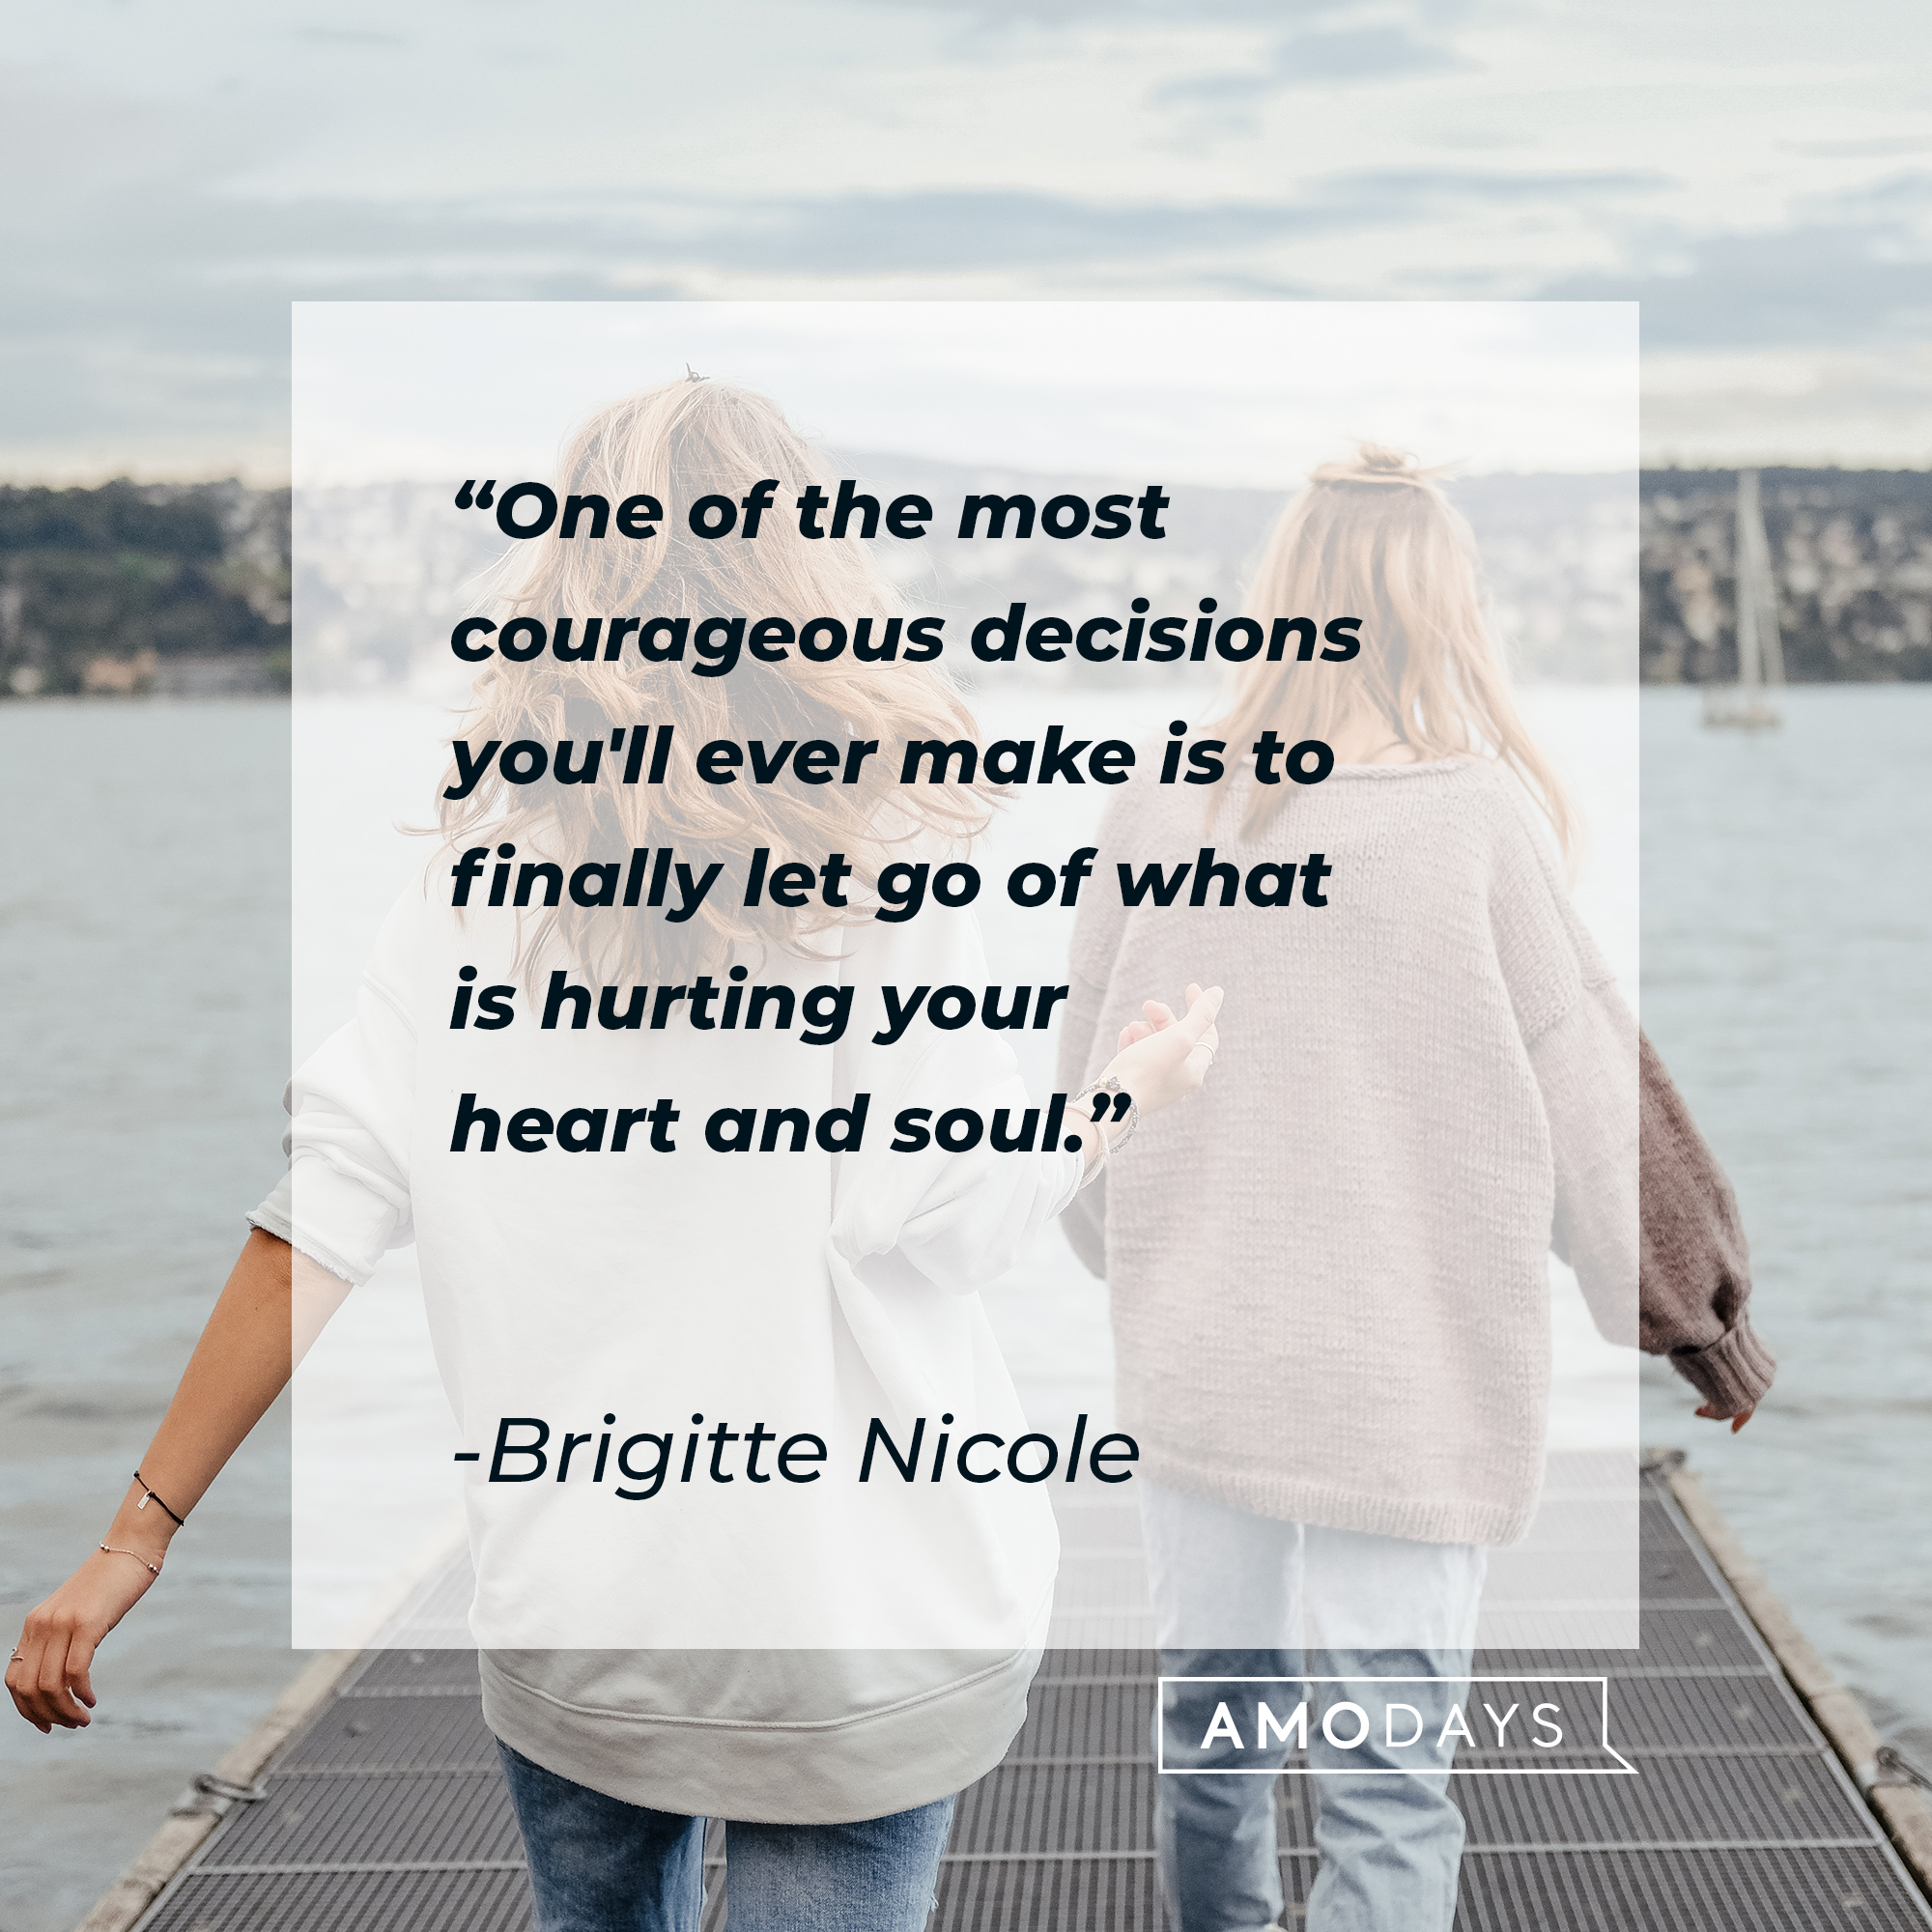 Brigitte Nicole's quote: "One of the most courageous decisions you'll ever make is to finally let go of what is hurting your heart and soul." | Image: Unsplash.com